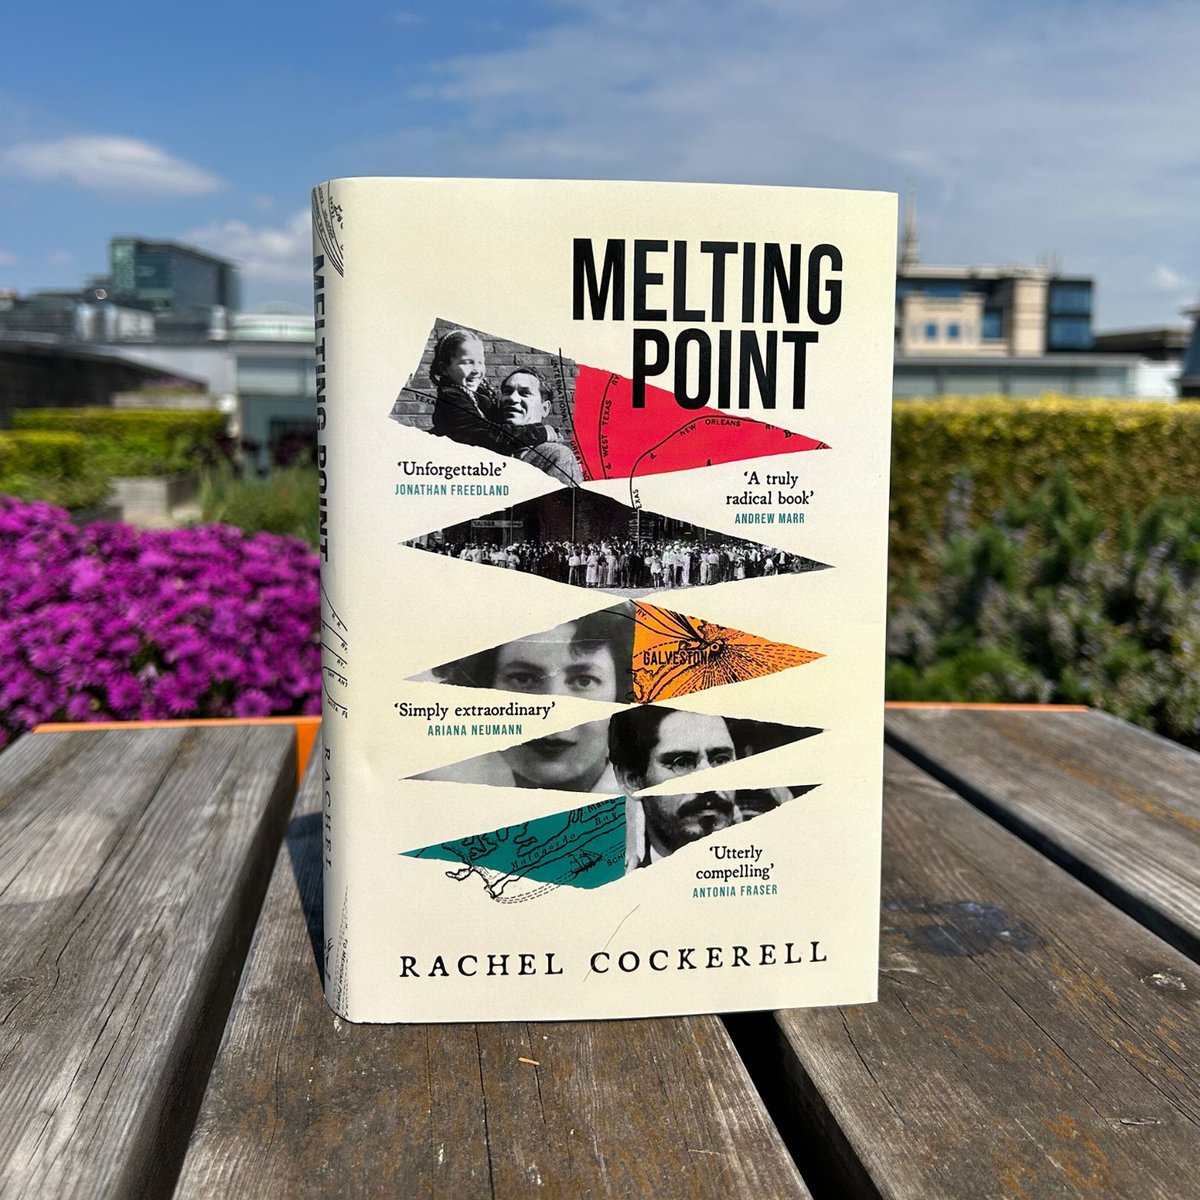 We're giving away 3 signed copies of #MeltingPoint! To enter, all you need to do is RT and make sure you follow both @rachelcockerell and @headlinepg. UK only. Three winners will be chosen at random on May 15. #giveaway